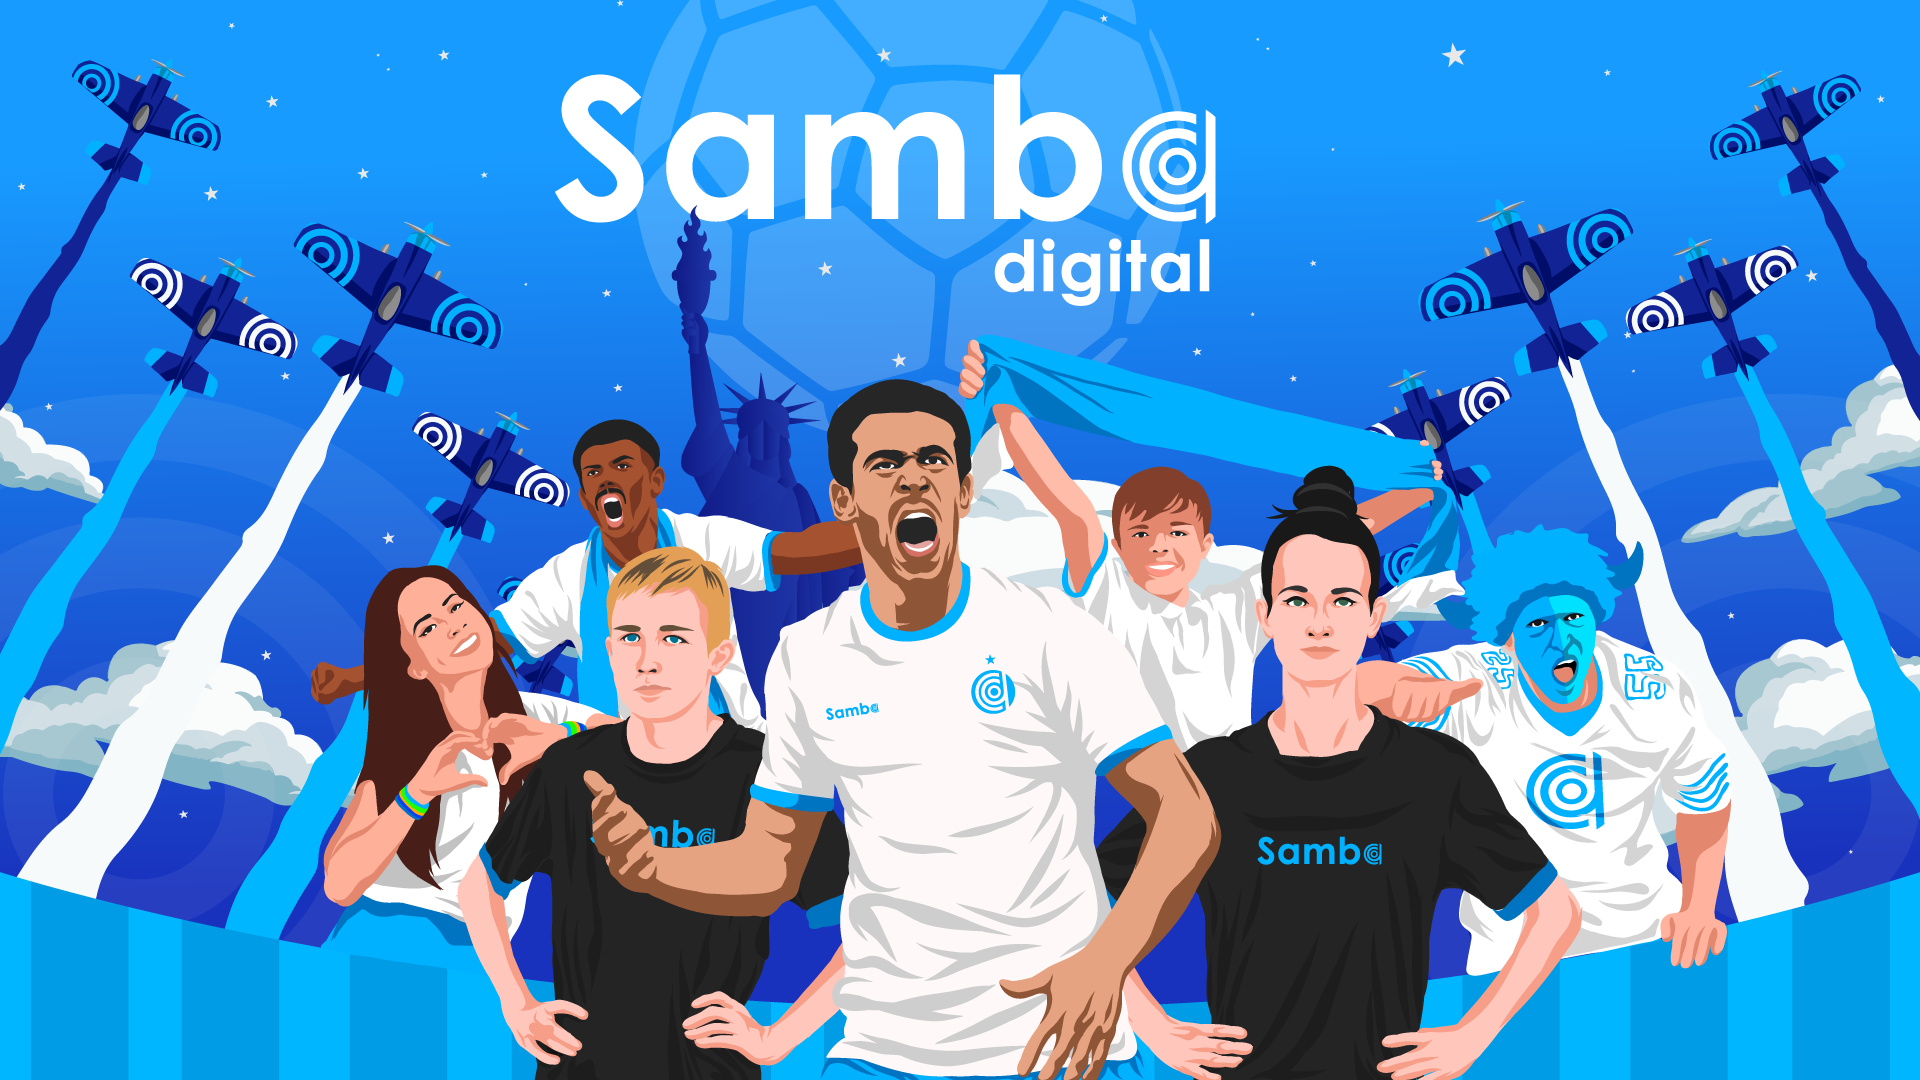 Samba Digital announces the creation of a new “Data Analytics” department intended to maximize digital marketing performance for its clients